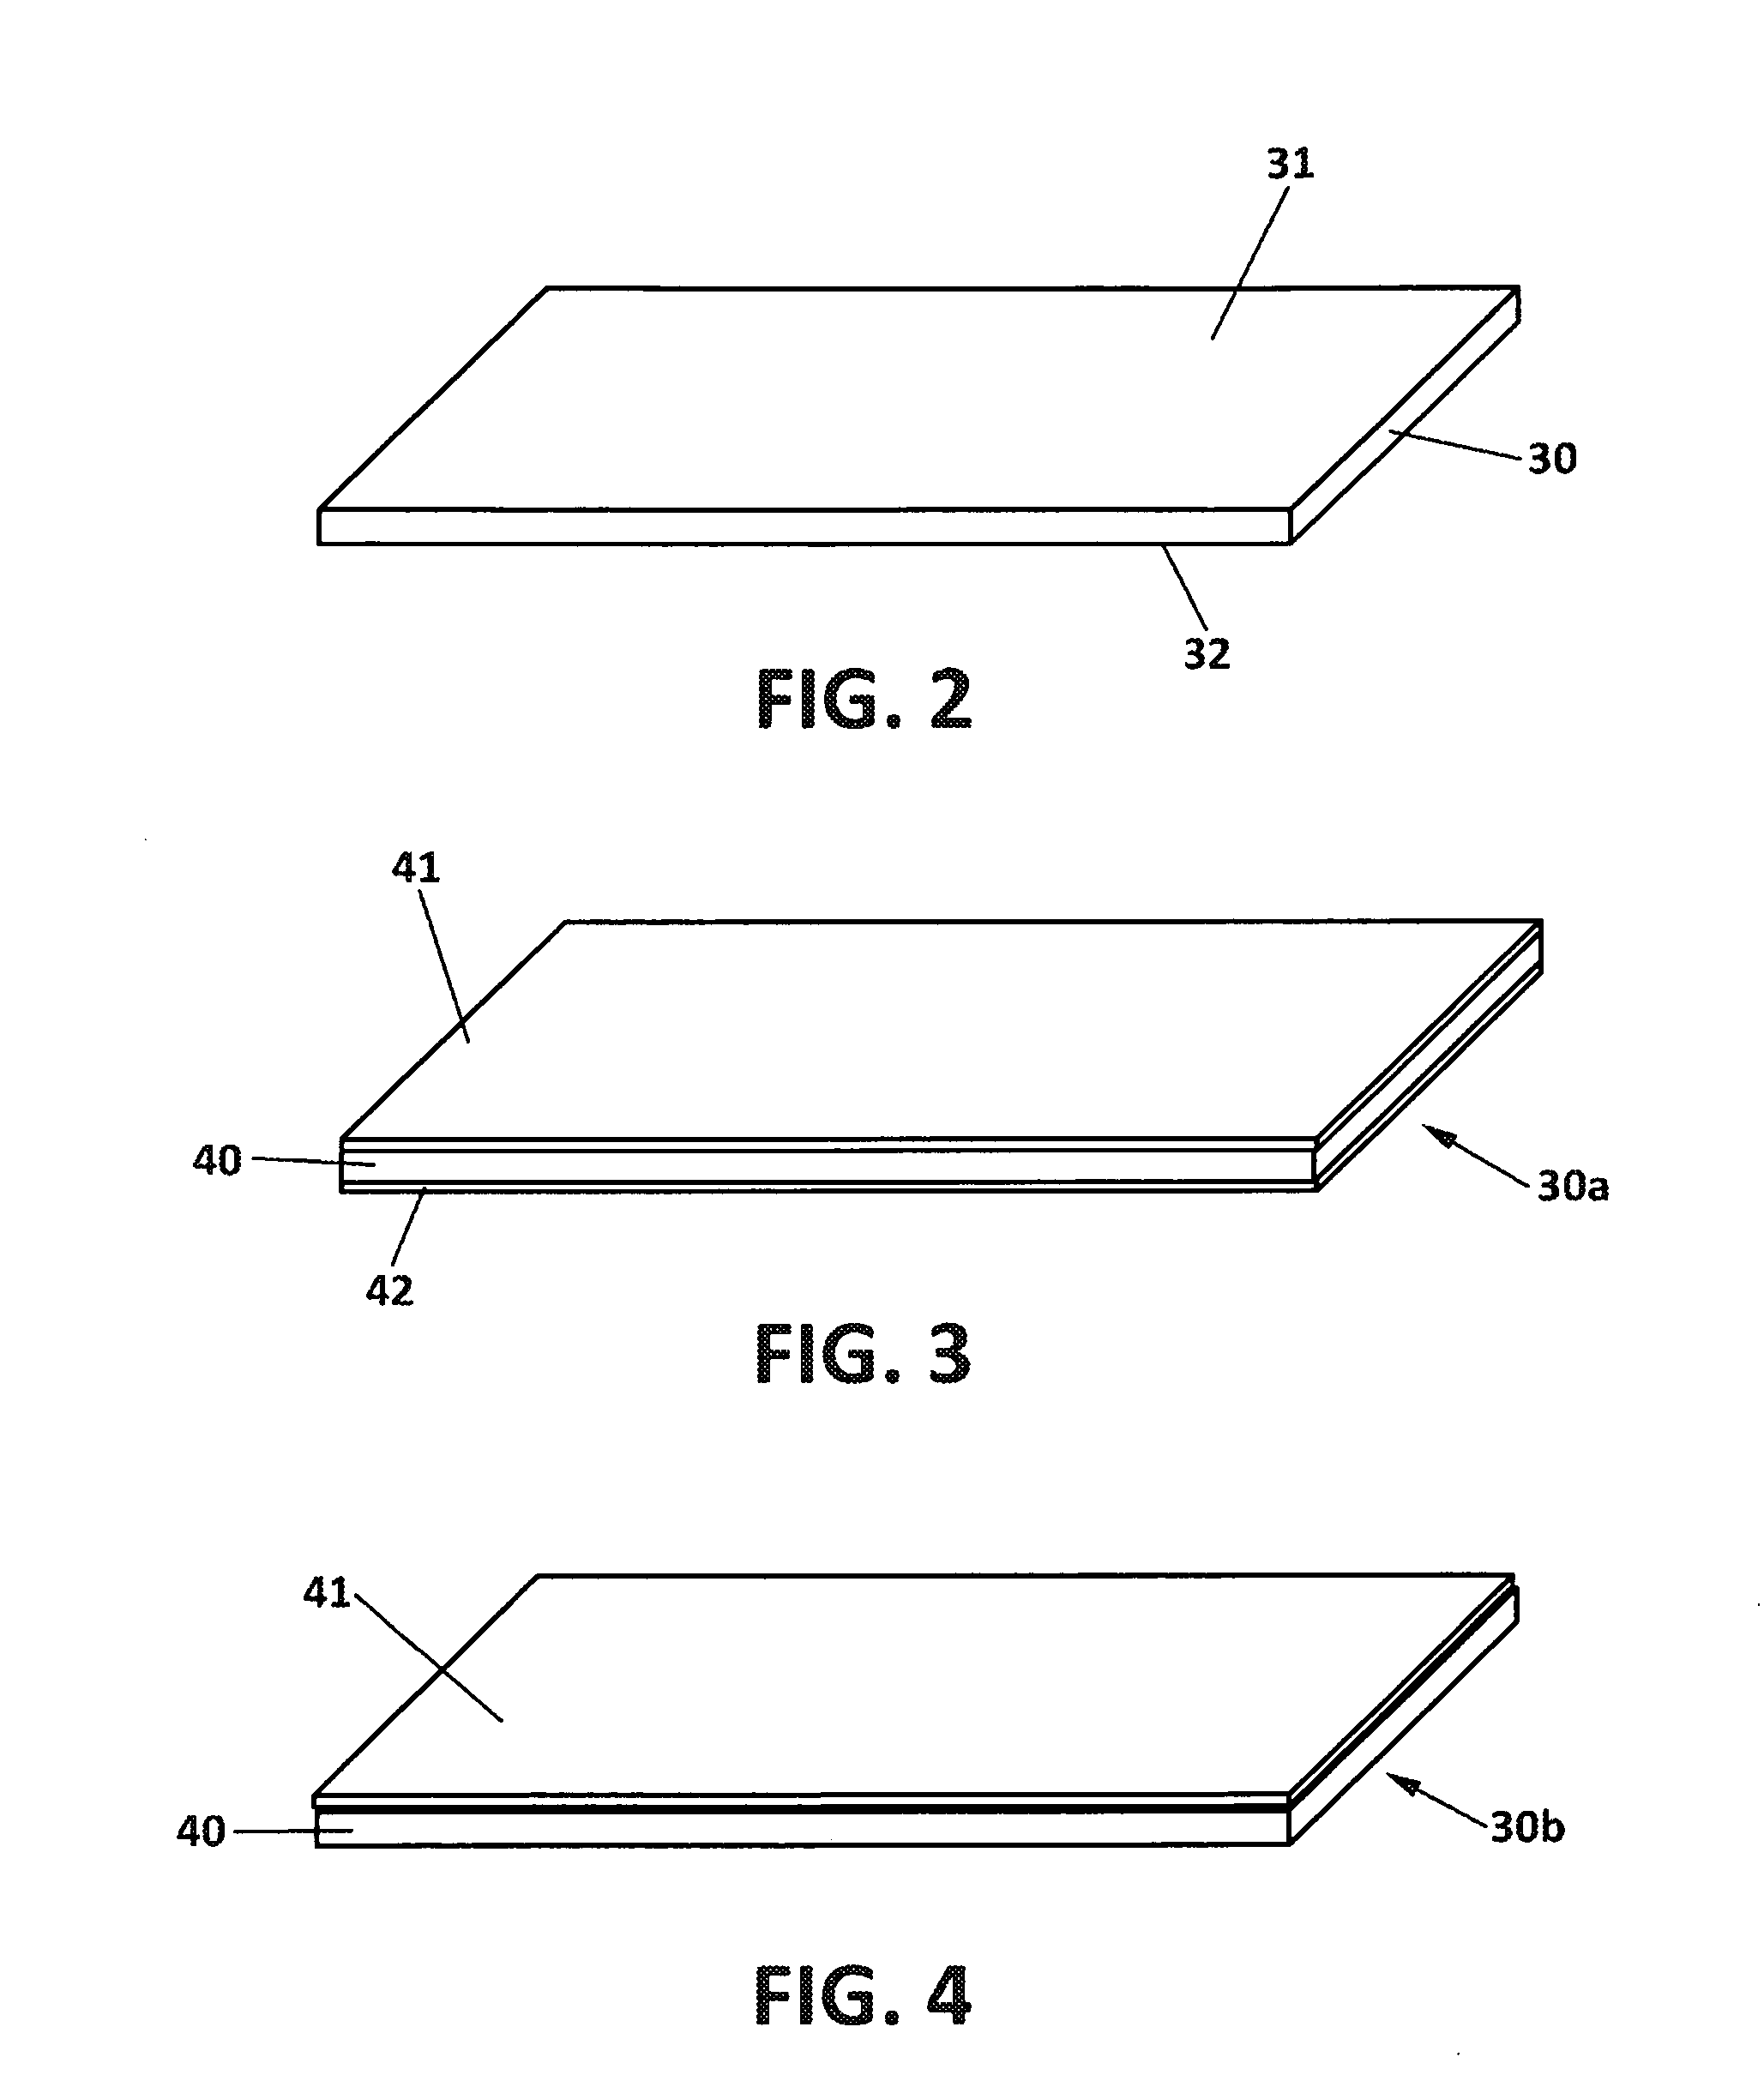 Element with variable stiffness controlled by negative pressure